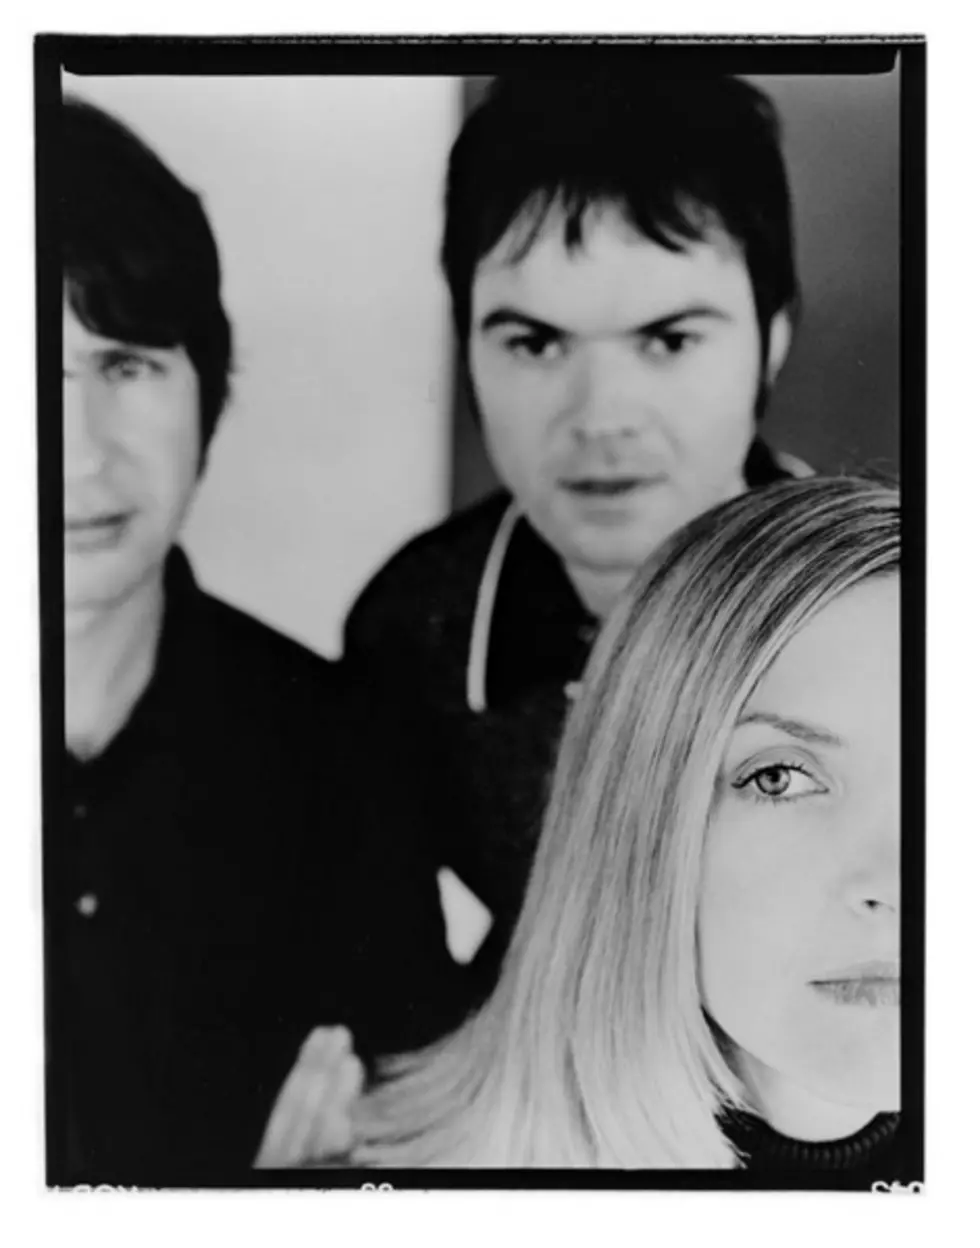 Saint Etienne playing Lincoln Hall on tour